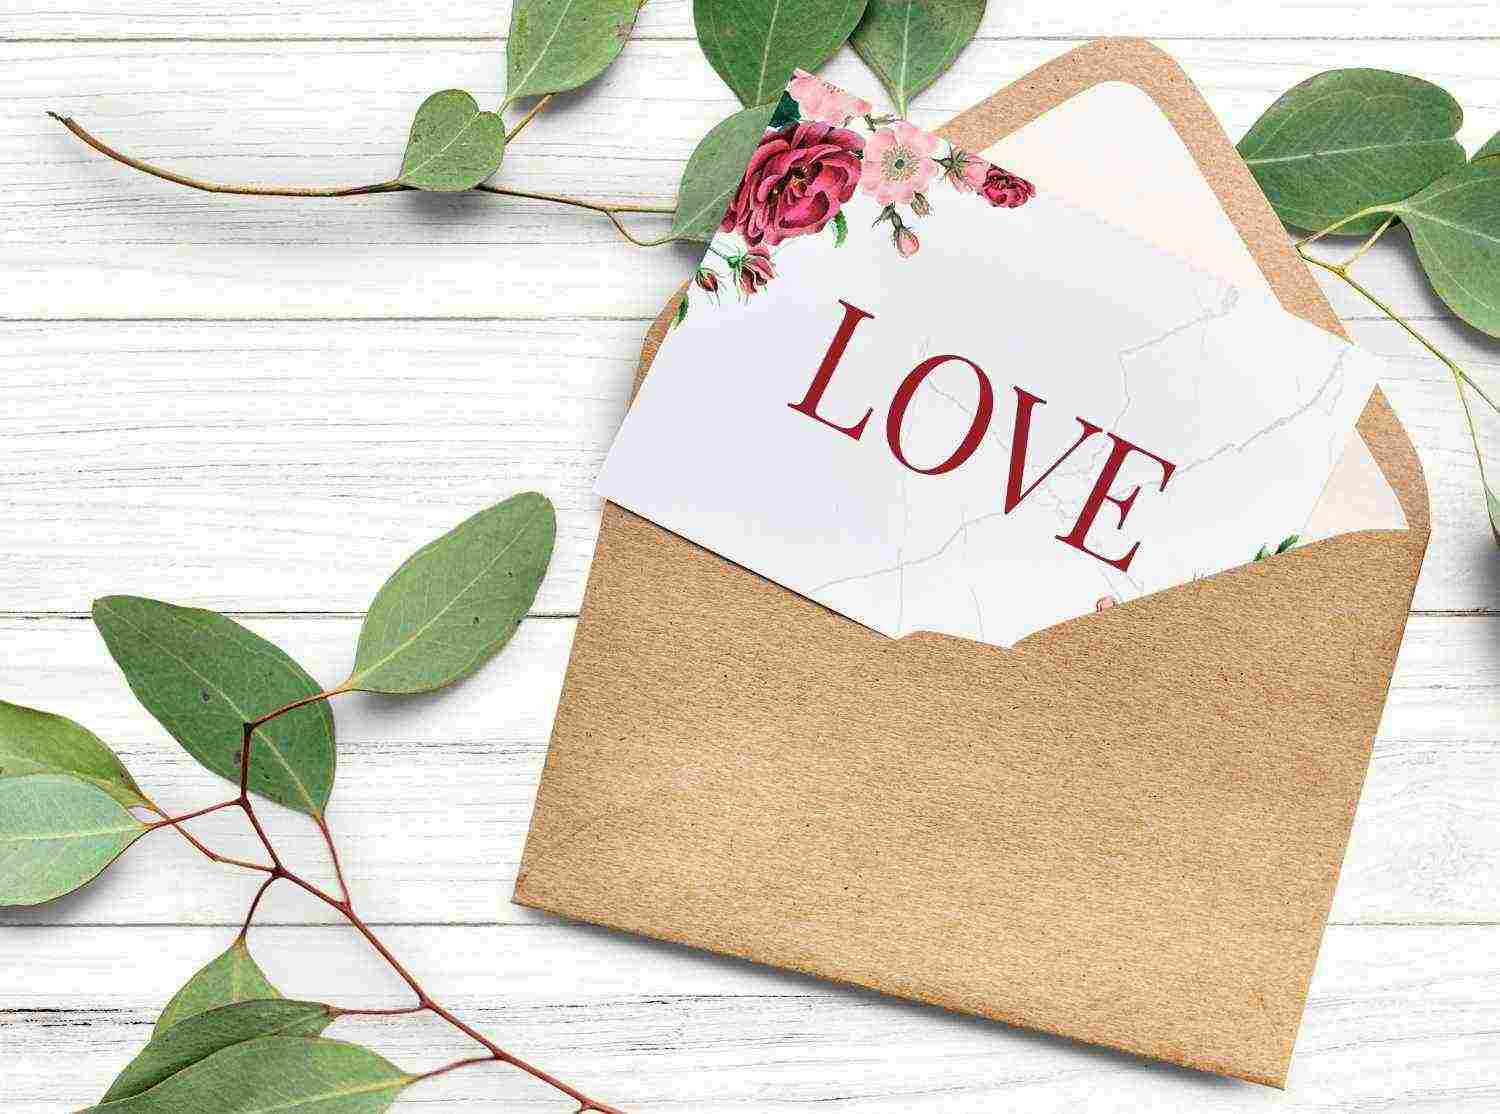 40 Romantic Love Letters For Her That Will Make Her Cry 